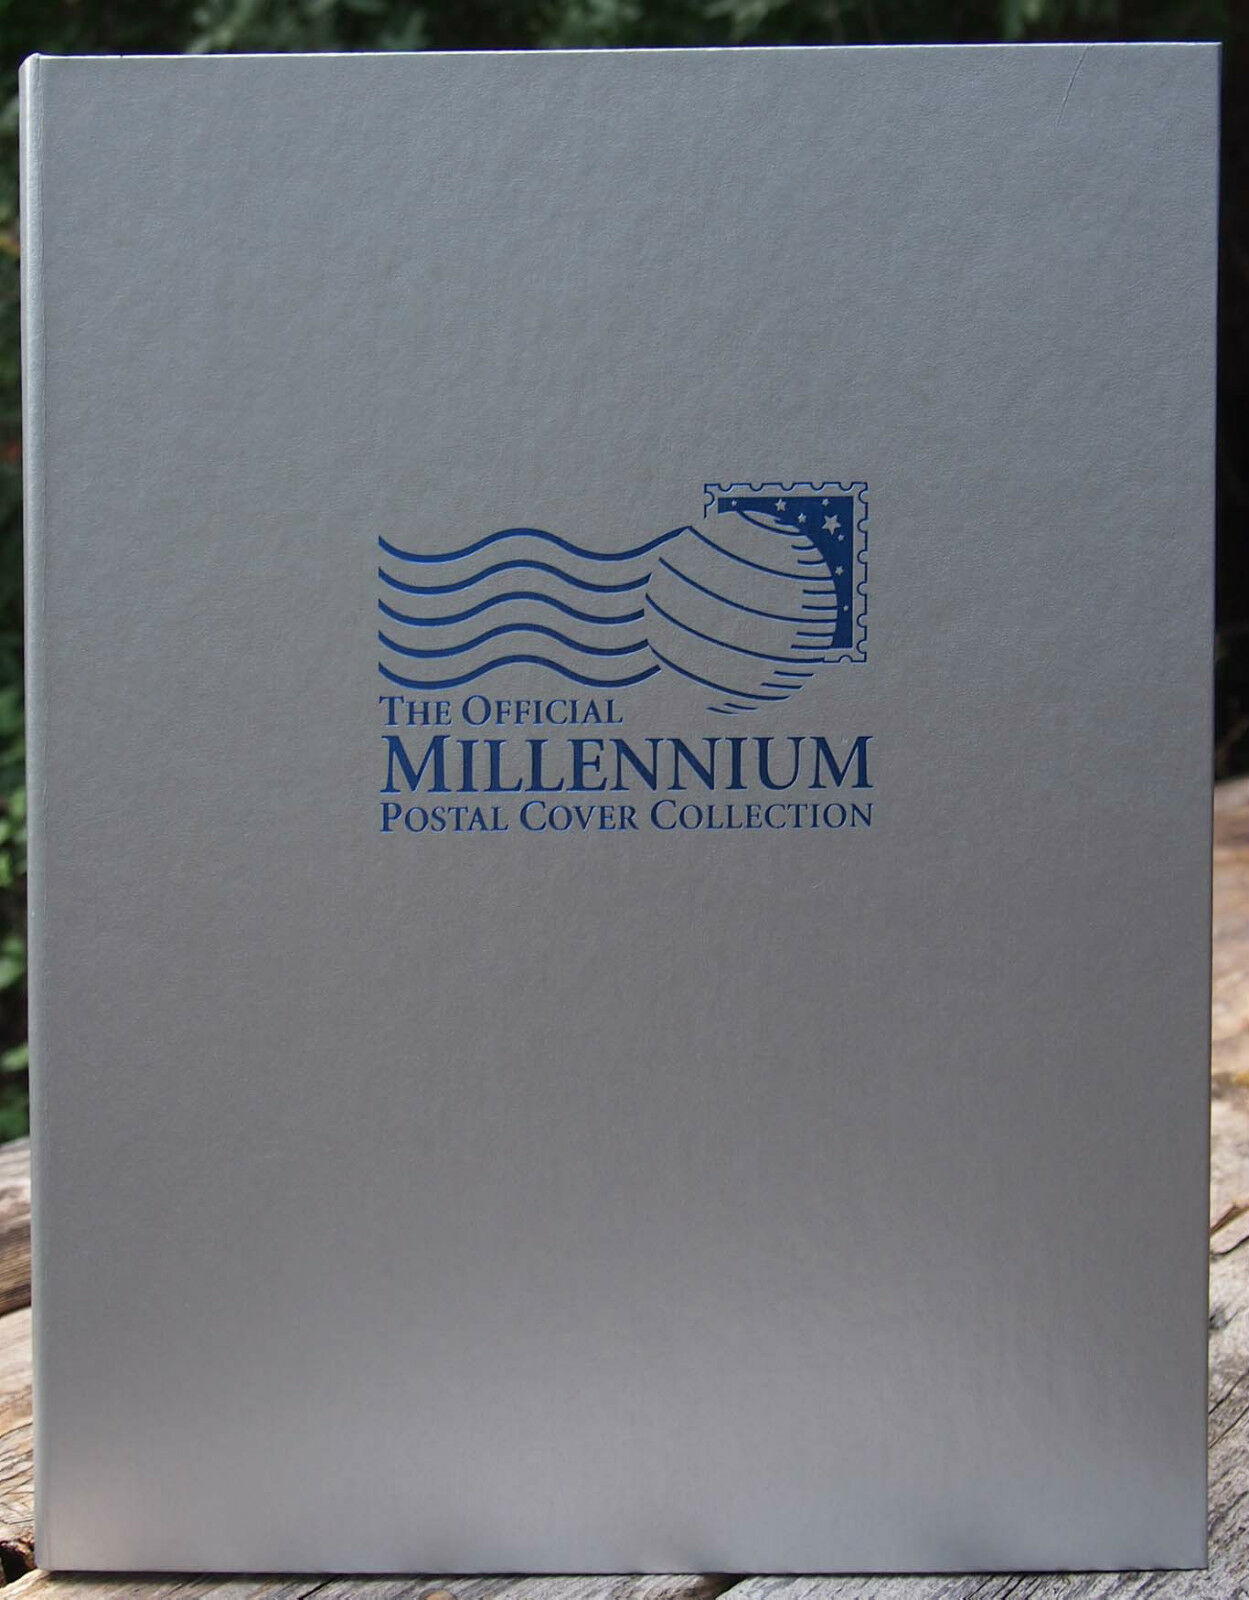 OFFICIAL MILLENNIUM 2000 POSTAL COVER COLLECTION of the WORLD'S 24 TIME ZONES